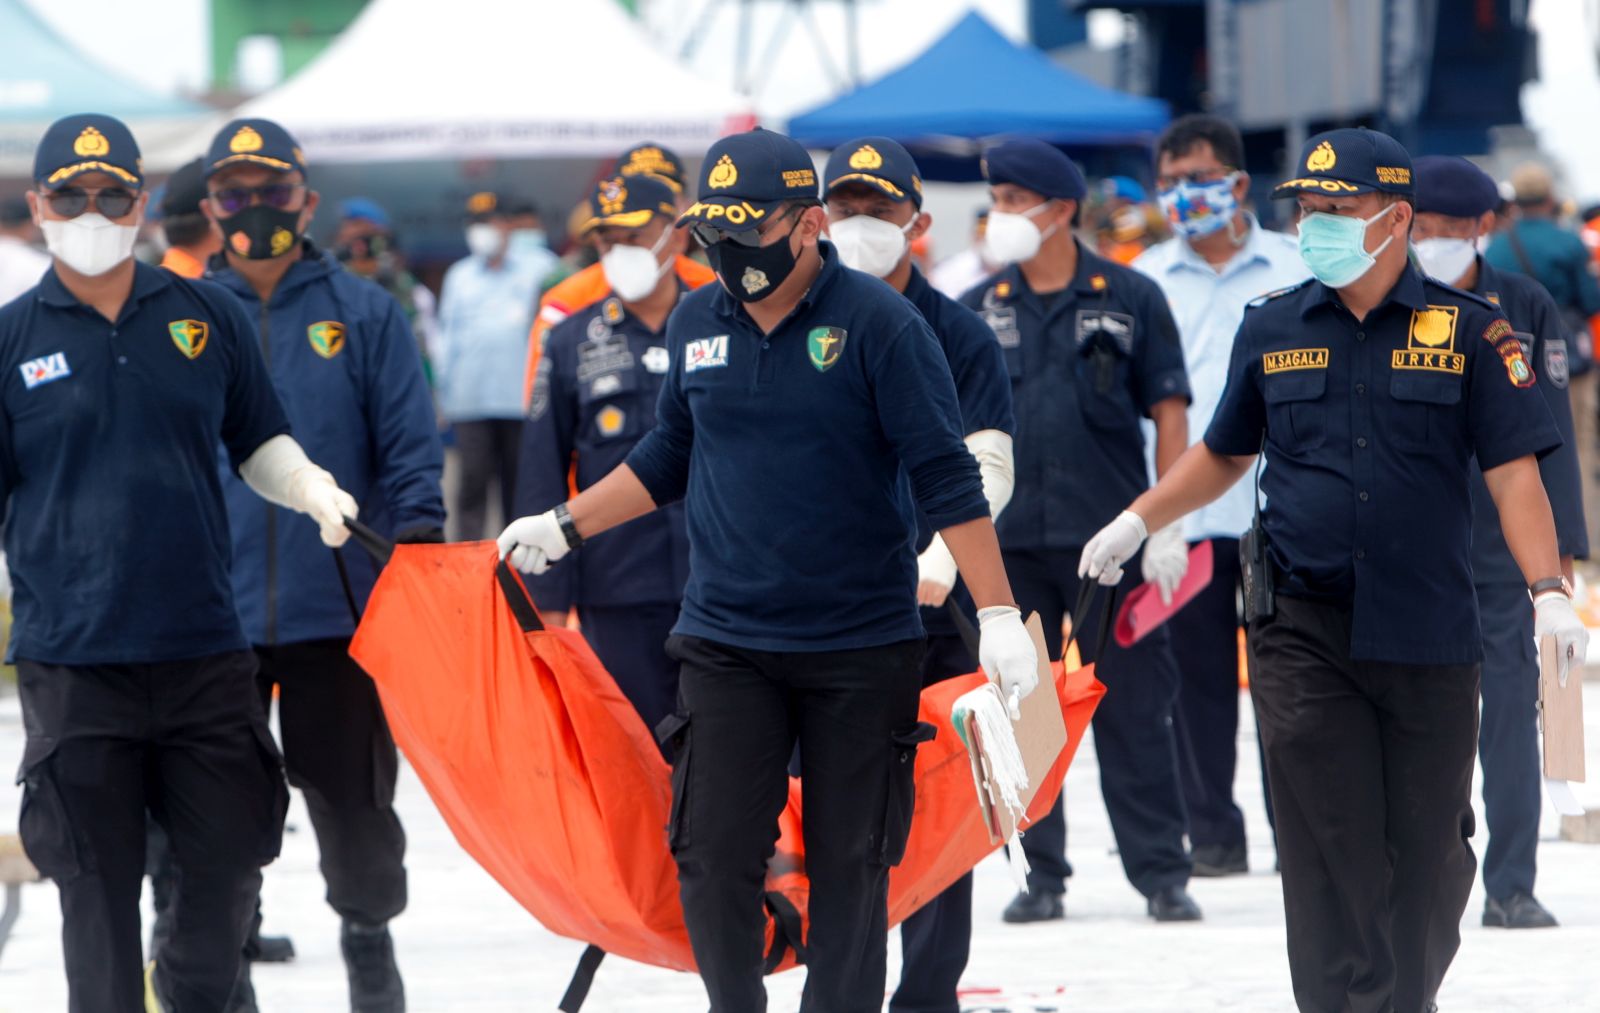 epa08932367 Members of Disaster Victim Investigation (DVI) carry a body bag  at Tanjung Priok port in Jakarta, Indonesia, 12 January 2021. Contact to Sriwijaya Air flight SJ182 was lost on 09 January 2021 shortly after the aircraft took off from Jakarta International Airport while en route to Pontianak in West Kalimantan province. The plane crashed into the sea off the Jakarta coast  EPA/ADI WEDA